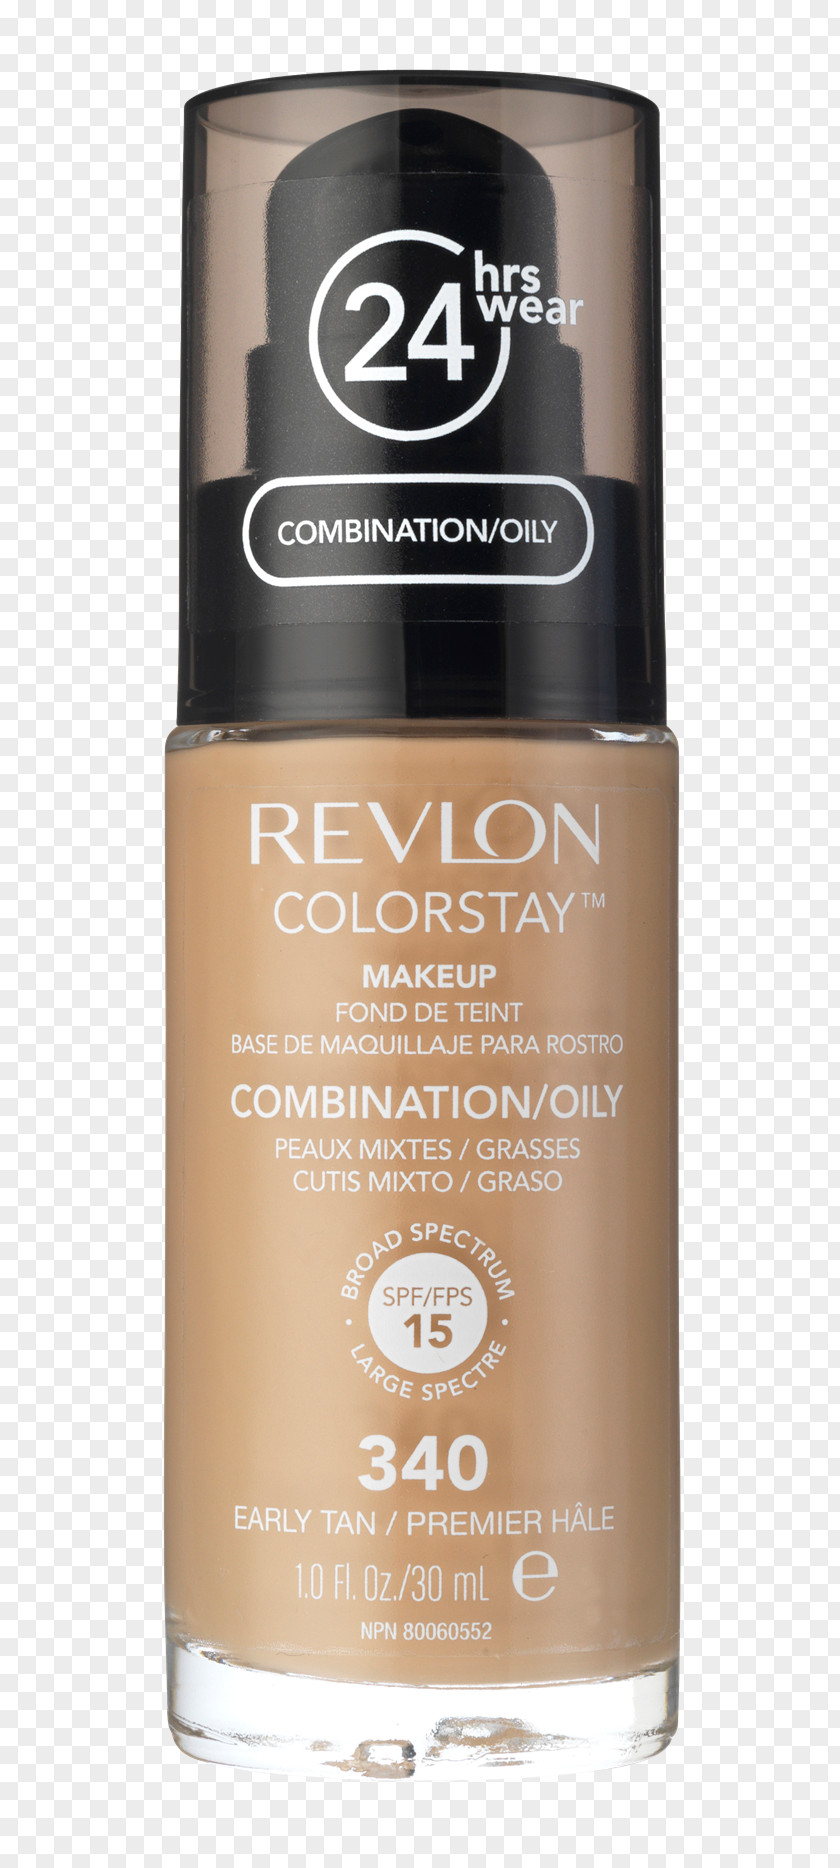 Colorstay Cosmetics Skin Care Revlon Product PNG